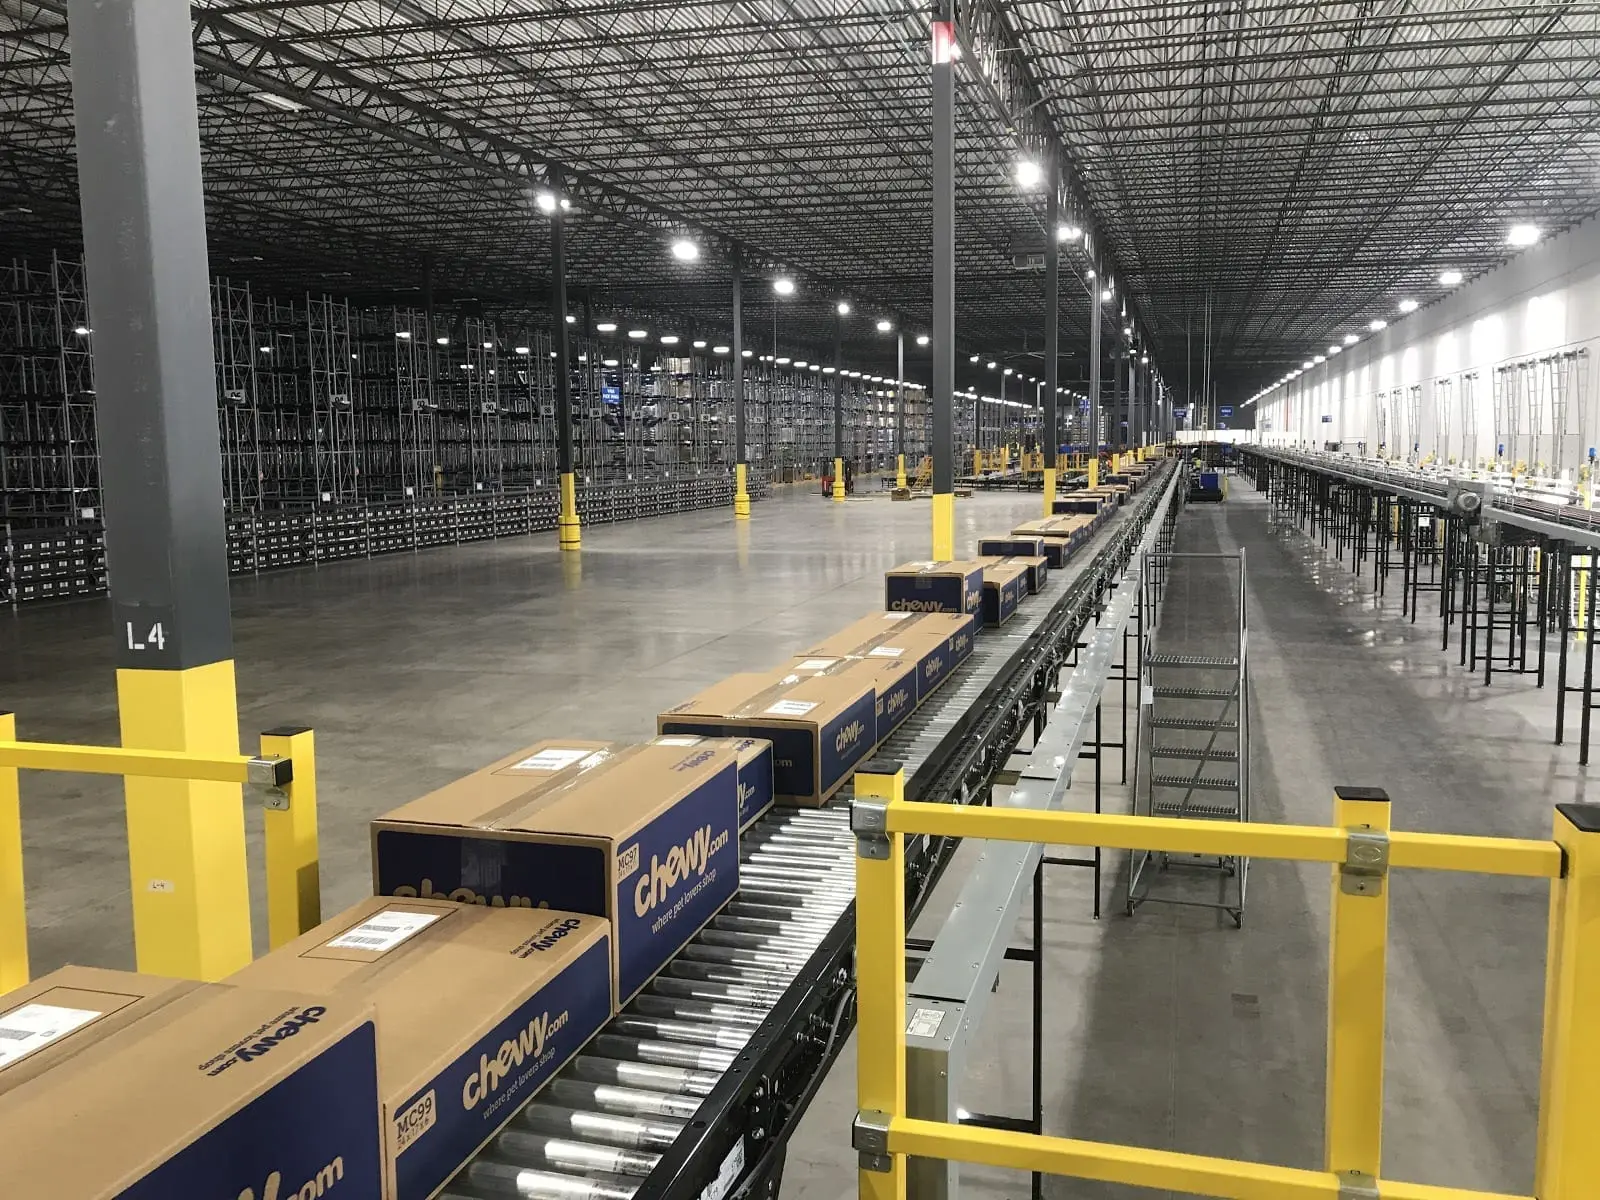 Chewy.com Warehouse